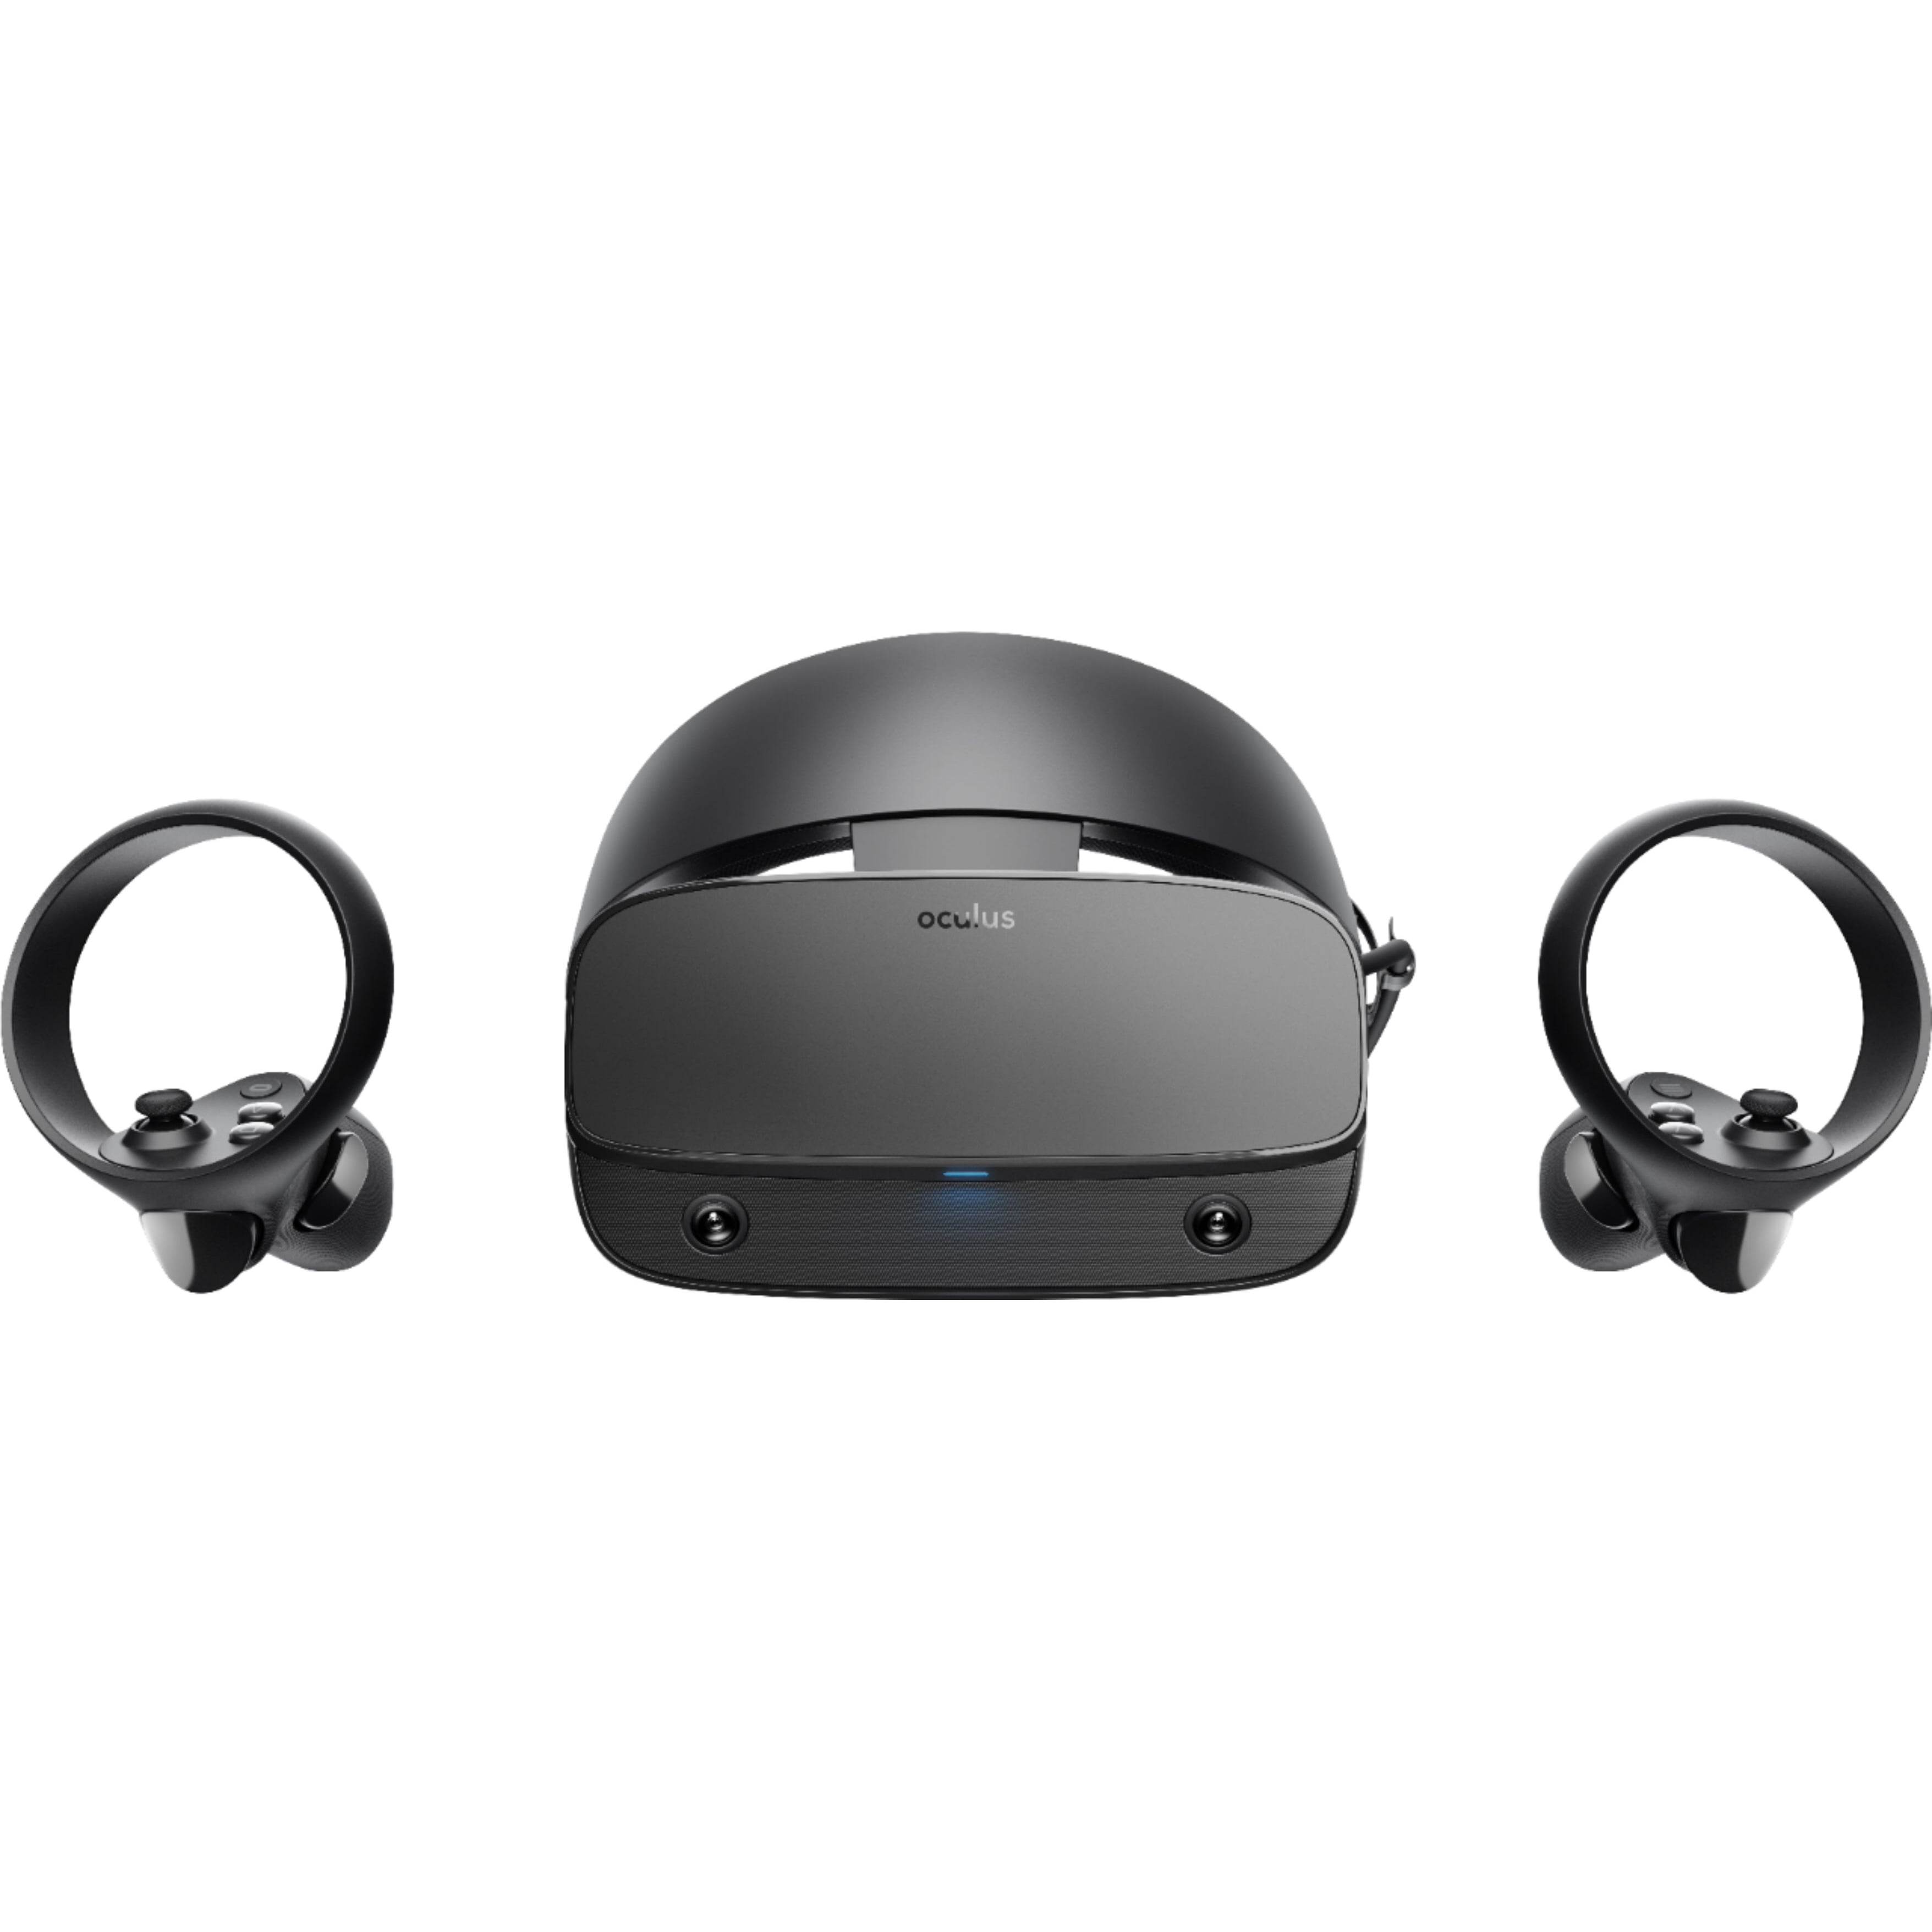 Oculus Rift S PC Powered VR Gaming Headset Black Touch Controller, 3D Positional Audio, Built-in Room-Scale Tracking, Fit Wheel Adjustable Halo Headband - Walmart.com